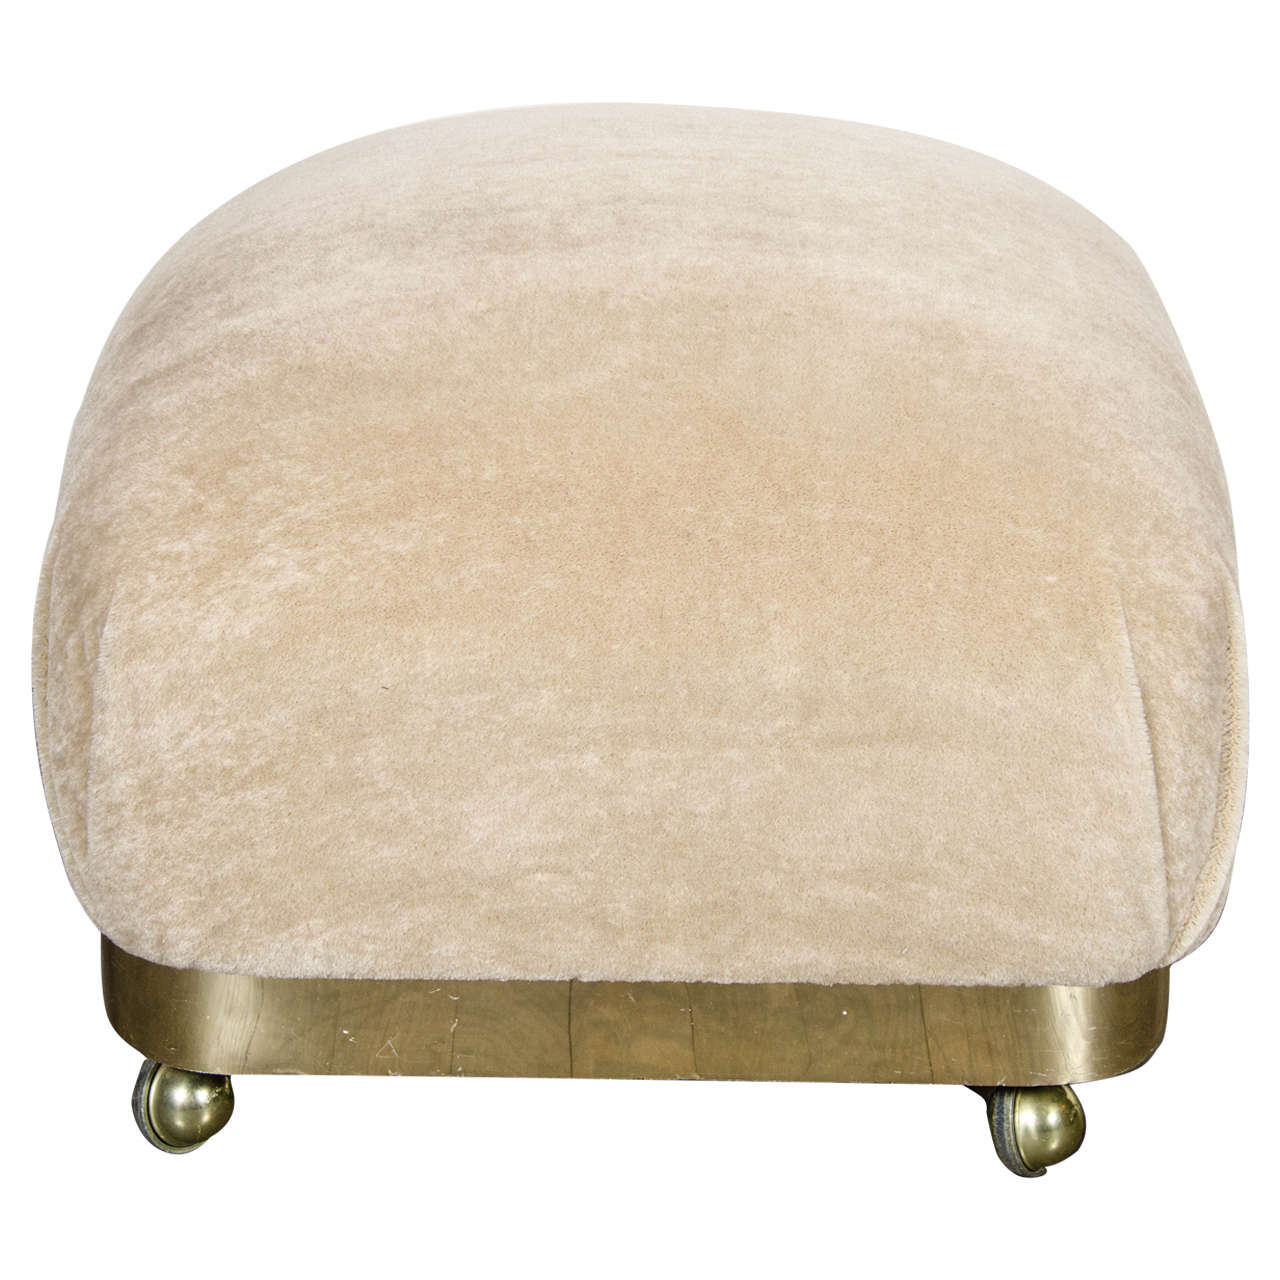 Mid-Century Modernist Stylized Ottoman or Pouf with Brushed Brass Banding